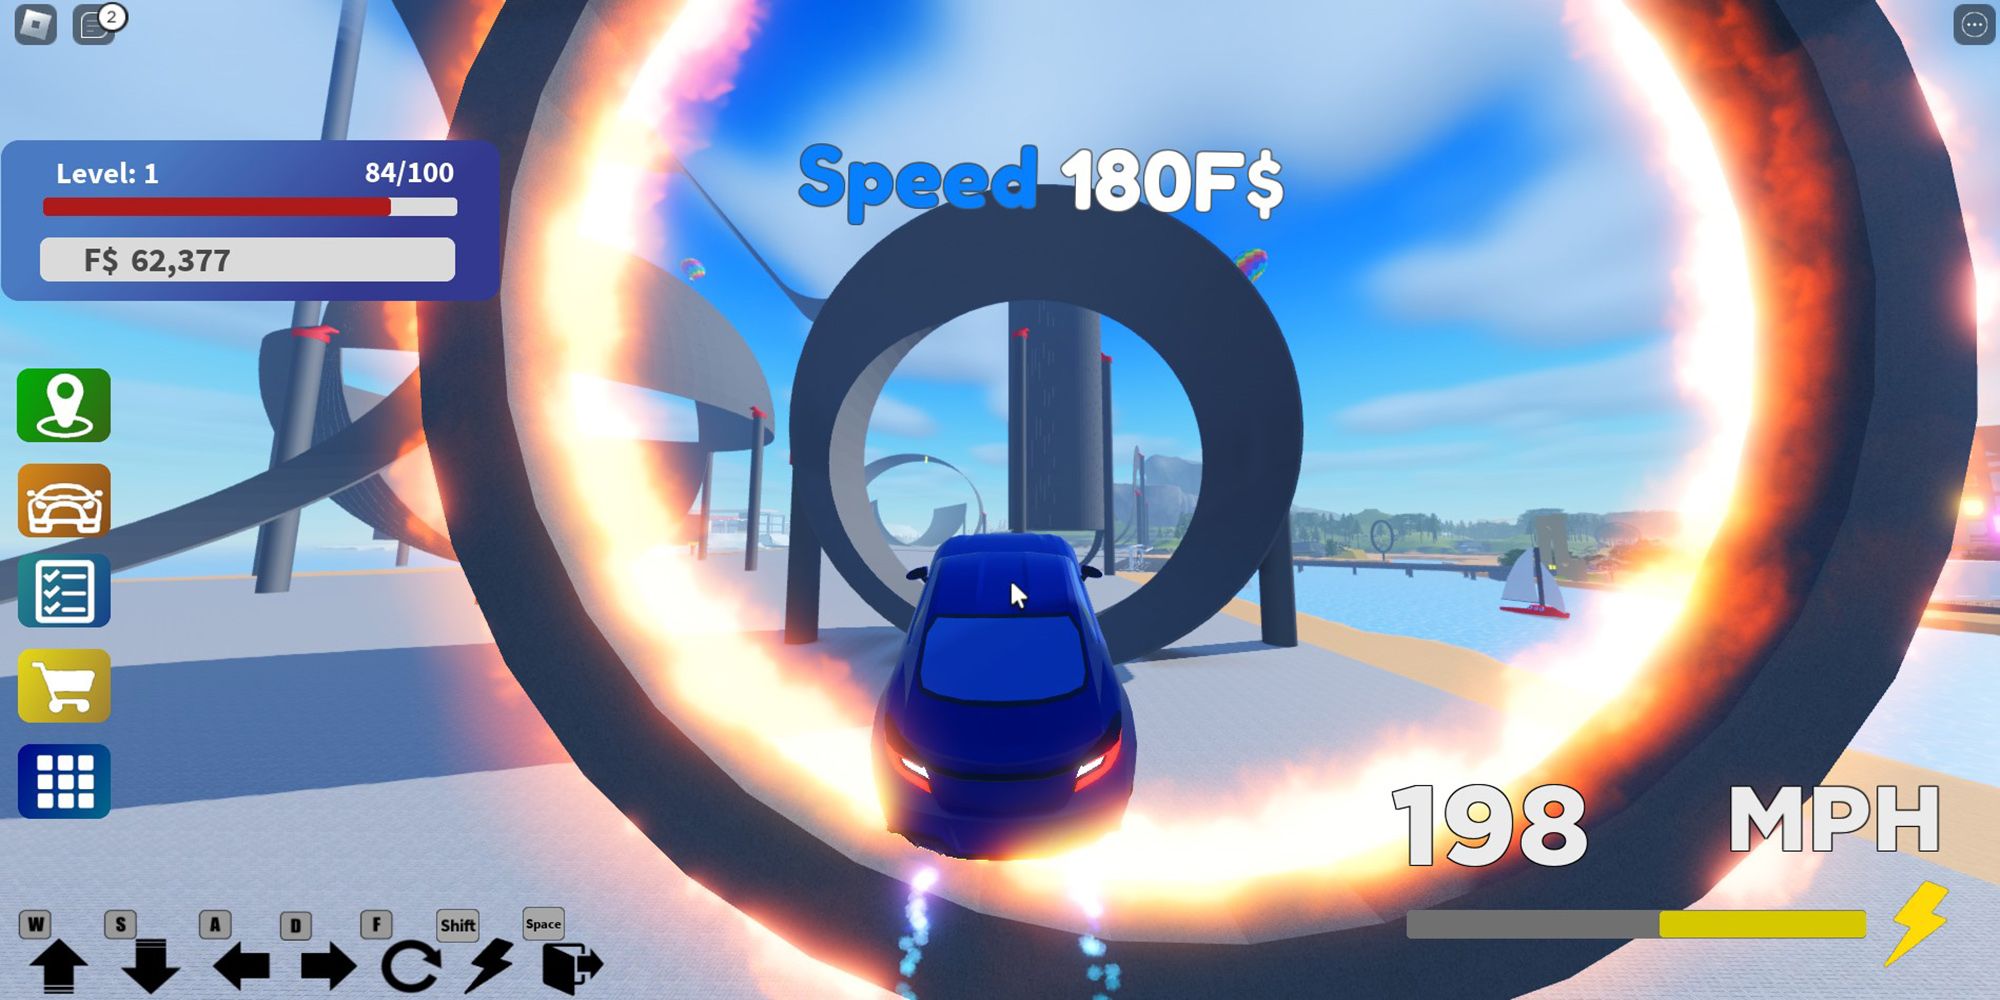 A blue sports car flies through a flaming hoop in a stunt park in the Roblox game DownForce Stunt Driving.